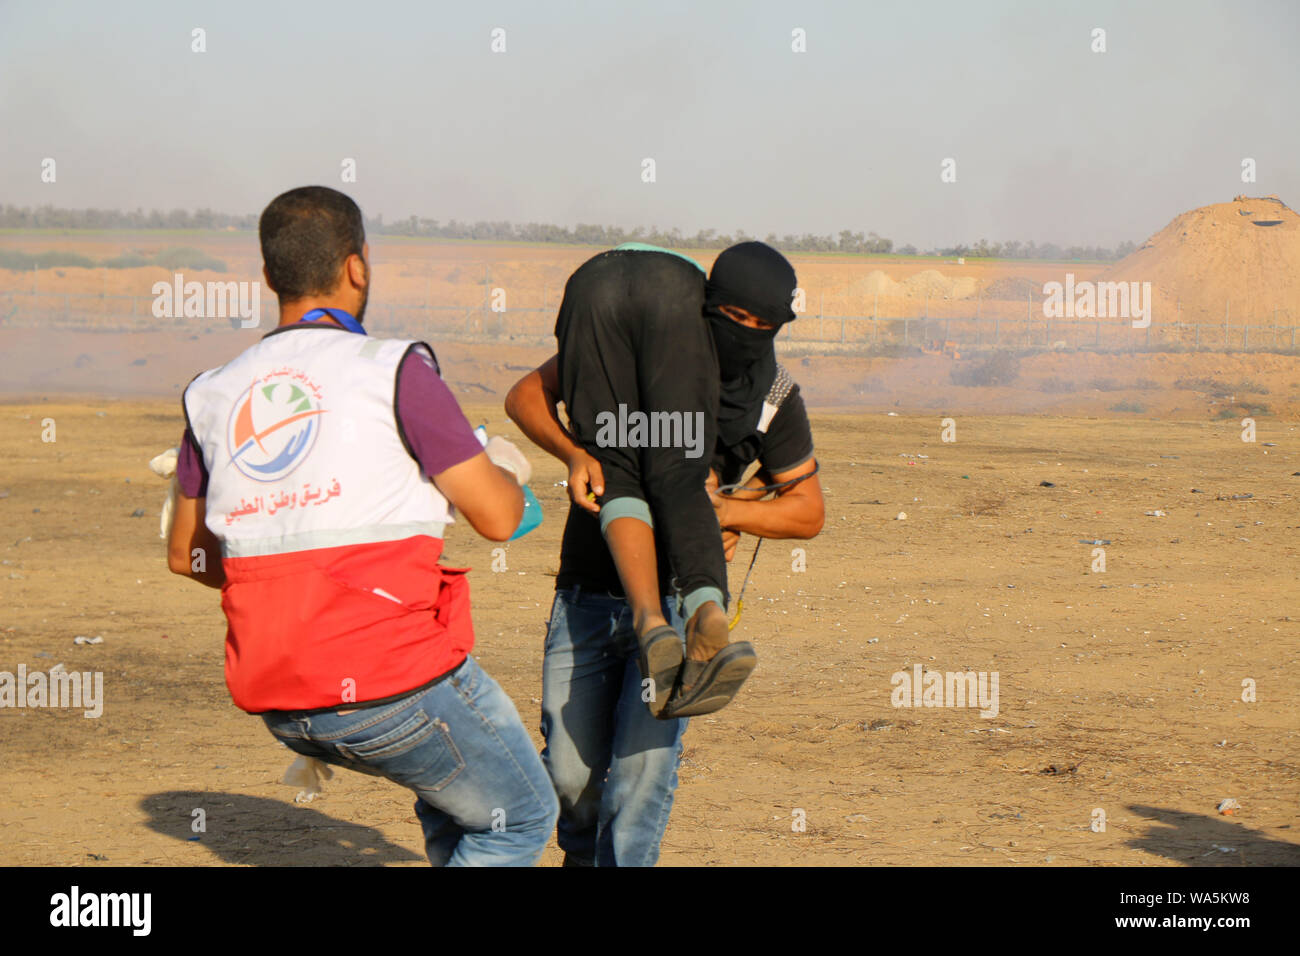 Khan Younis, Gaza Strip, Palestinian Territory. 16th Aug, 2019. A wounded Palestinian protester is evacuated during clashes with Israeli troops following the tents protest where Palestinians demand the right to return to their homeland at the Israel-Gaza border. Credit: Mariam Dagga/APA Images/ZUMA Wire/Alamy Live News Stock Photo